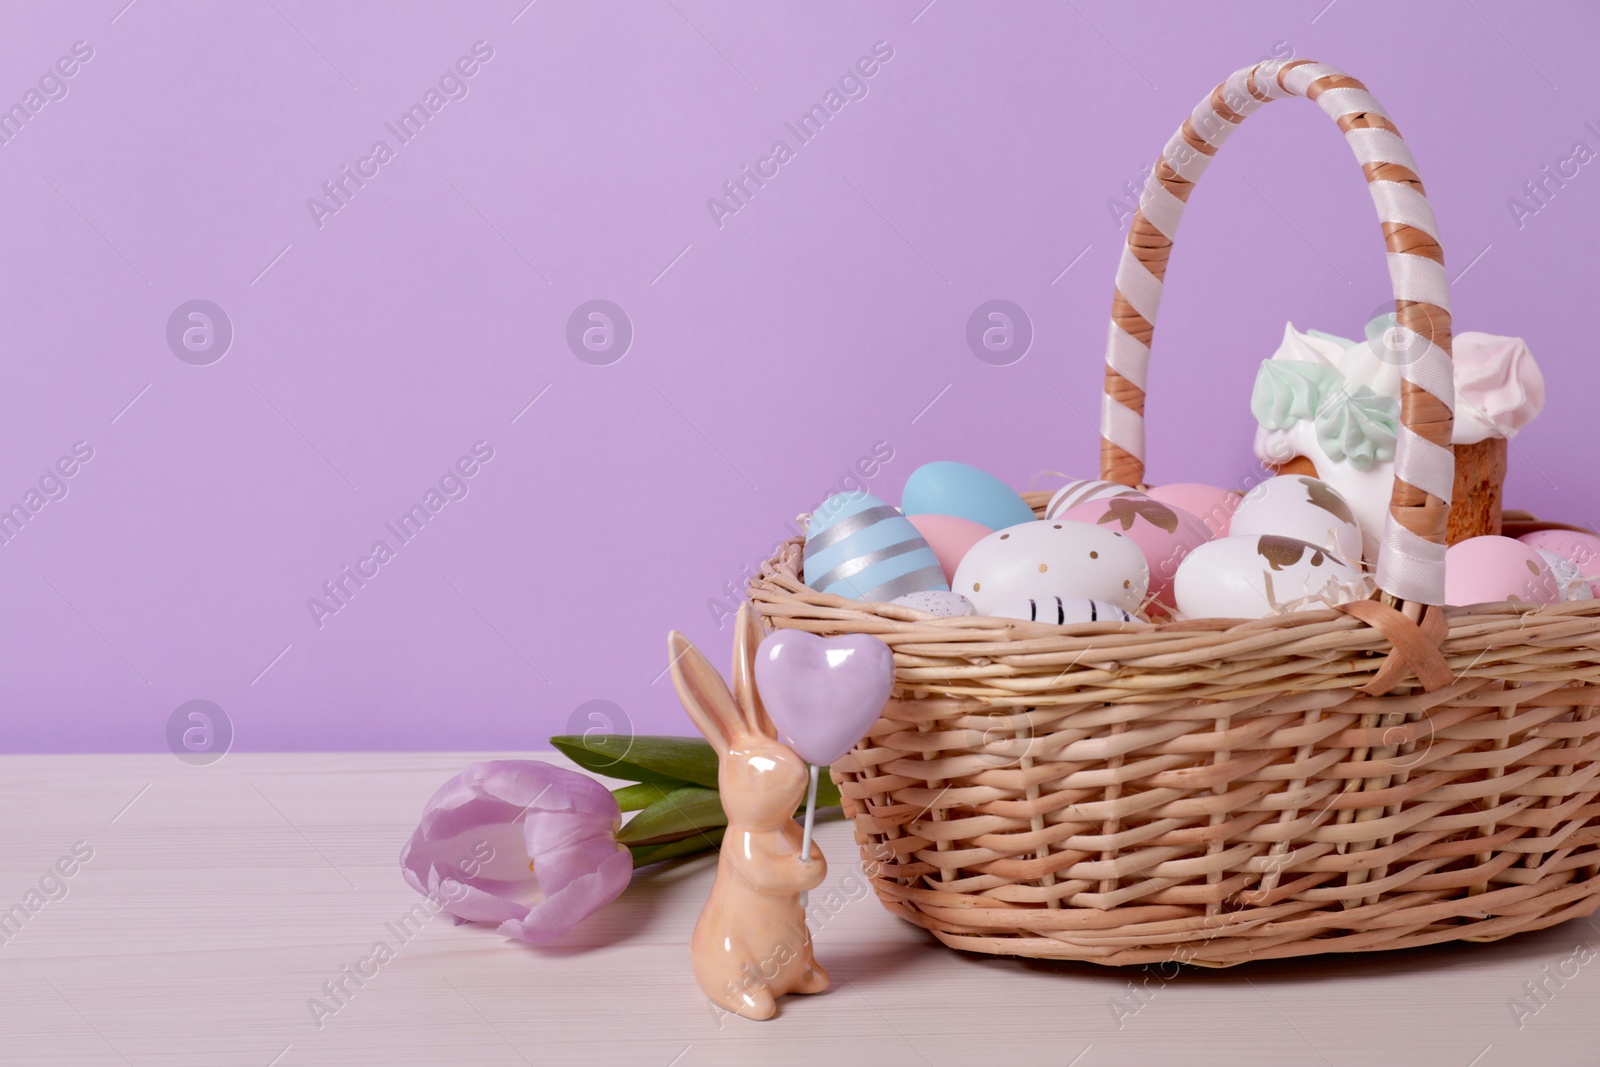 Photo of Easter basket with painted eggs, cake, flower and rabbit figure on white wooden table. Space for text